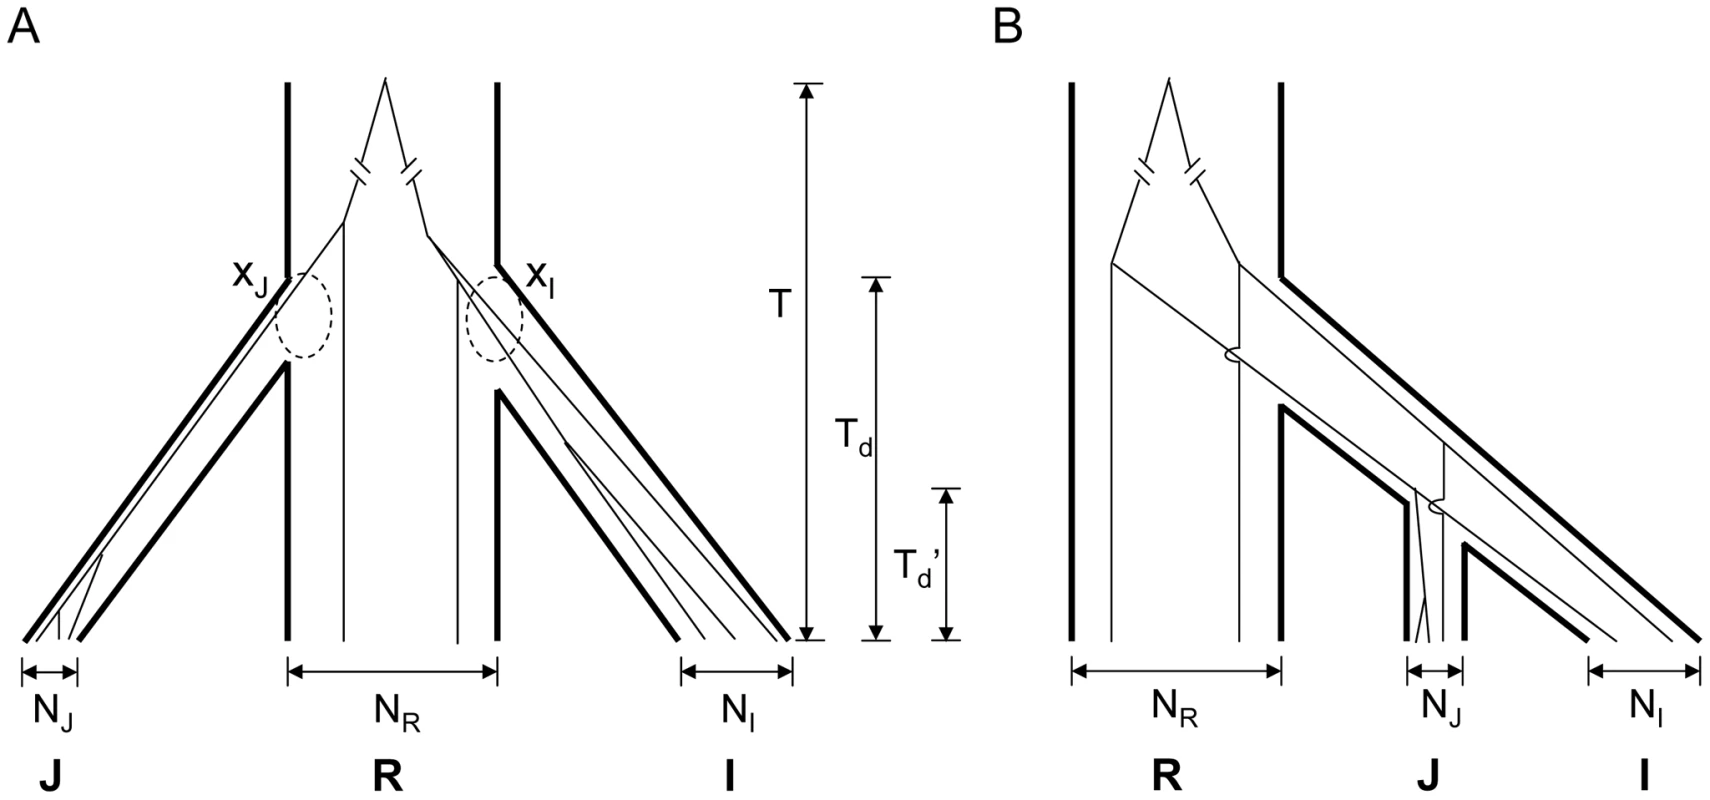 Two models for the domestication of <i>indica</i> (I) and <i>japonica</i> (J).